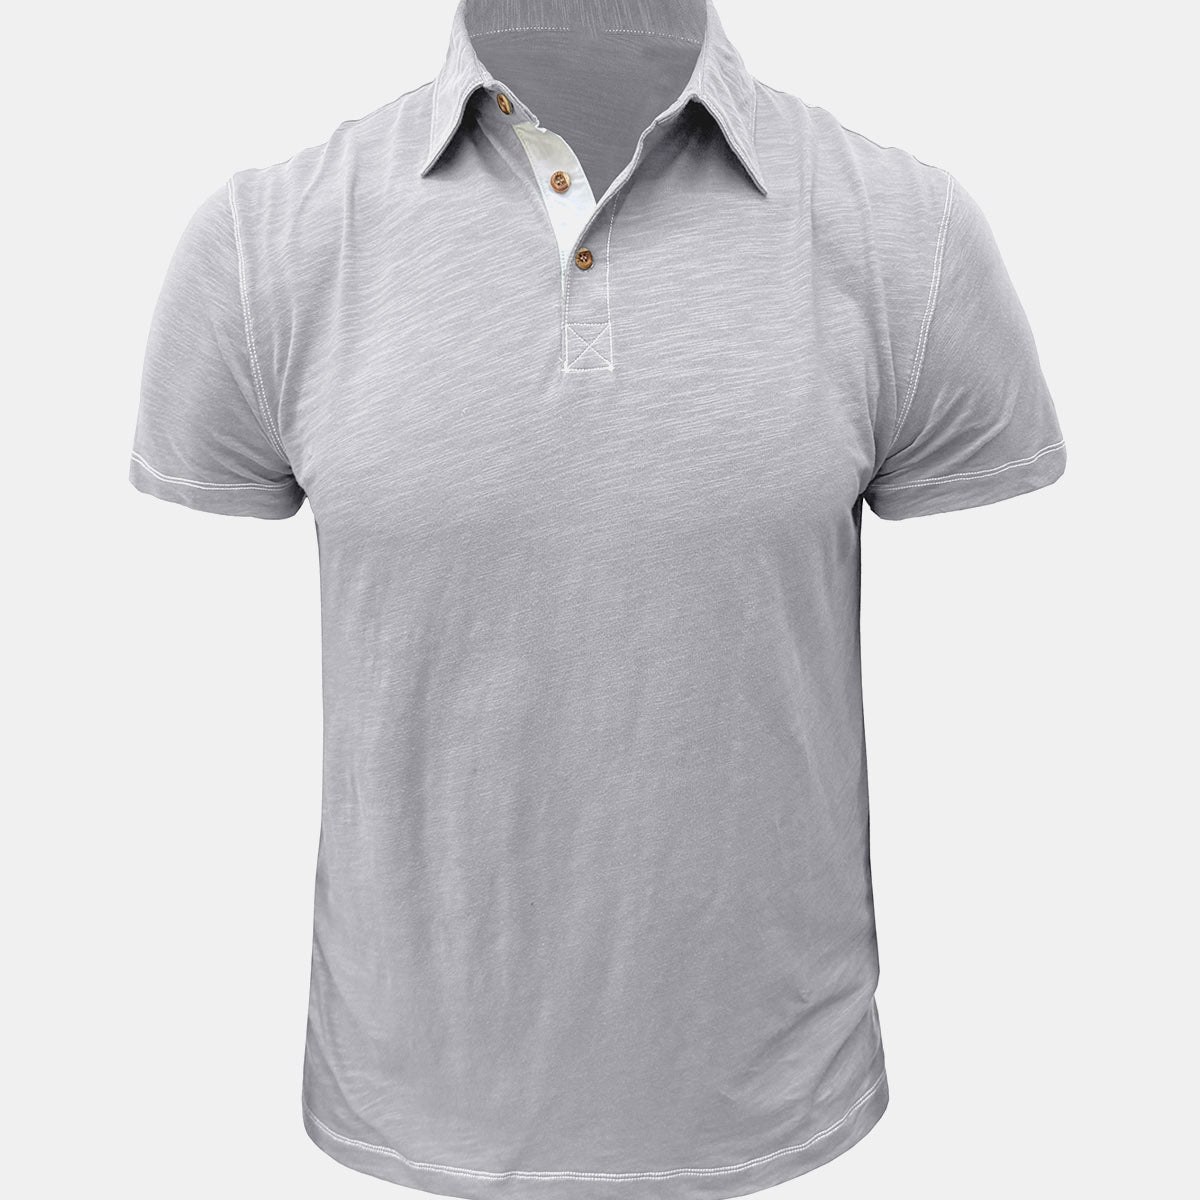 Men's Solid Color Leisure Summer Breathable Cotton Short Sleeve Polo Shirt